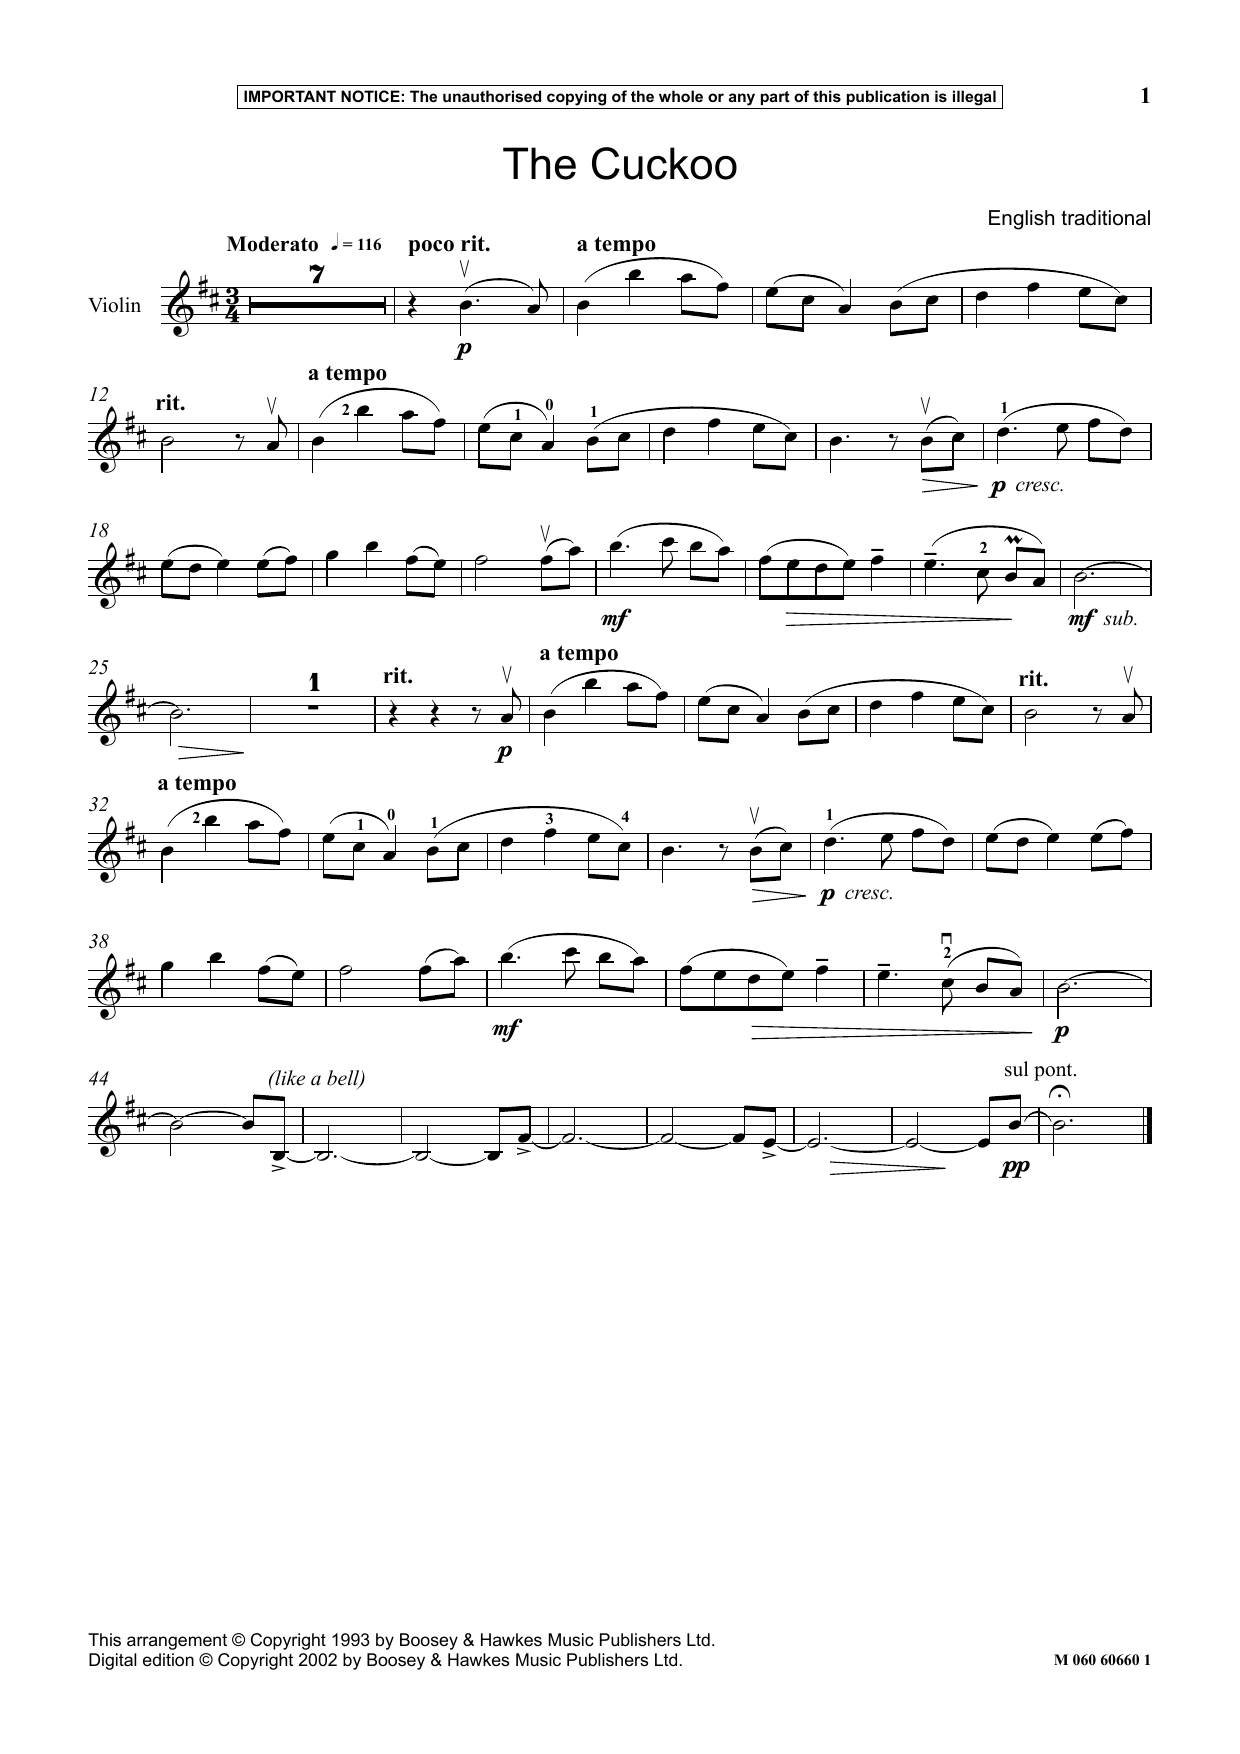 Download English Traditional The Cuckoo Sheet Music